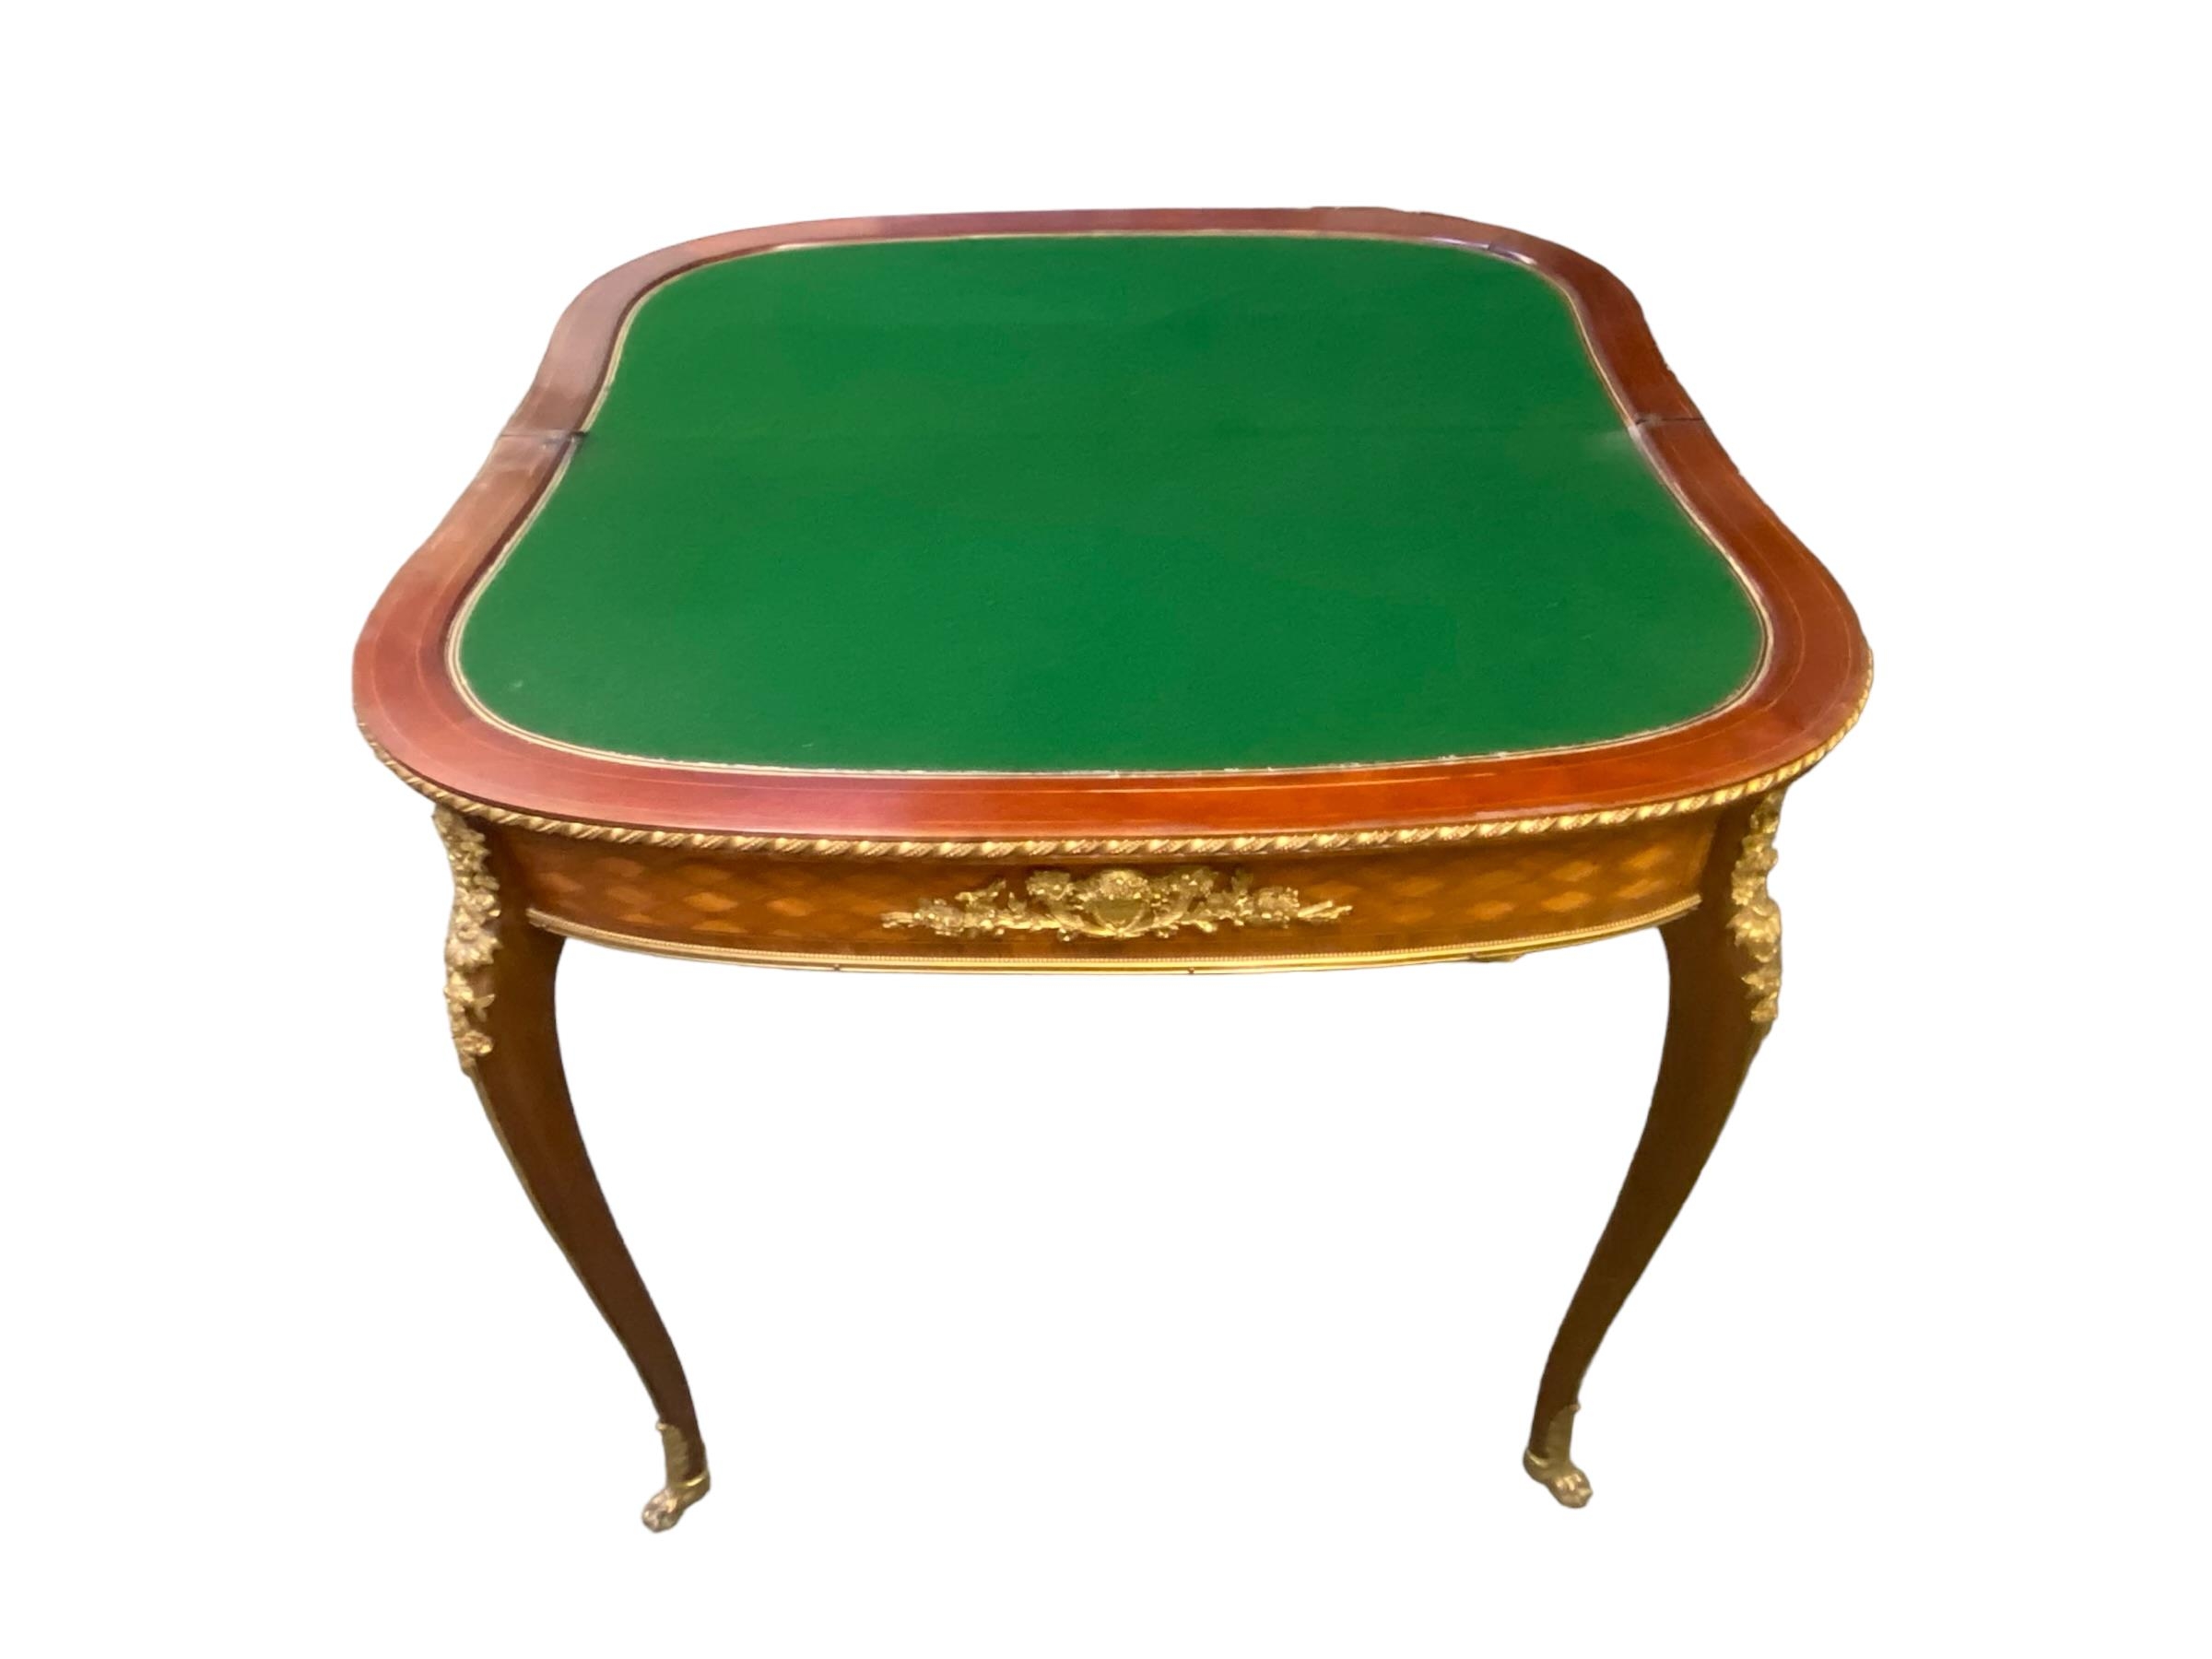 Louis XVI style kingwood ormulu mounted flip top card table, with single recessed drawer 84 cm W x - Image 3 of 3